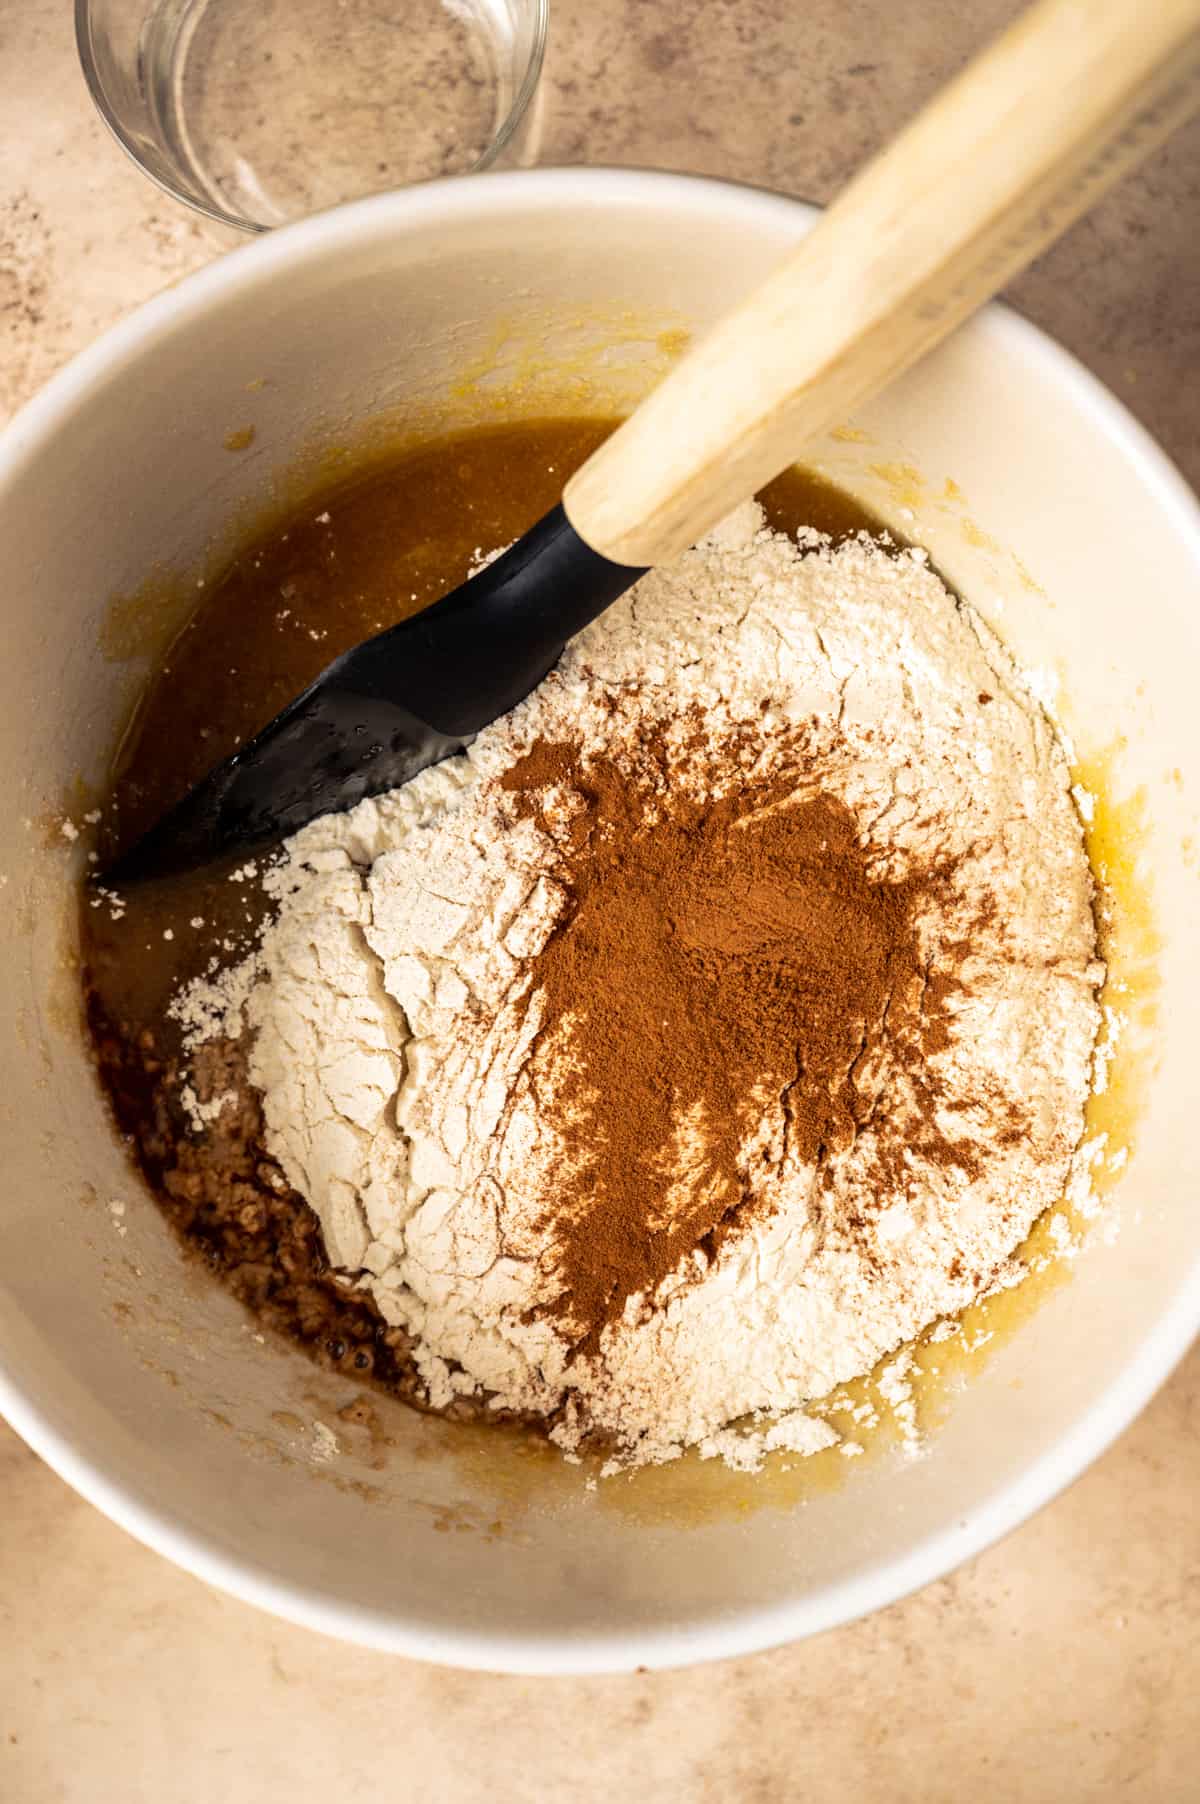 The flour and spices sitting on top of the previous mixture.